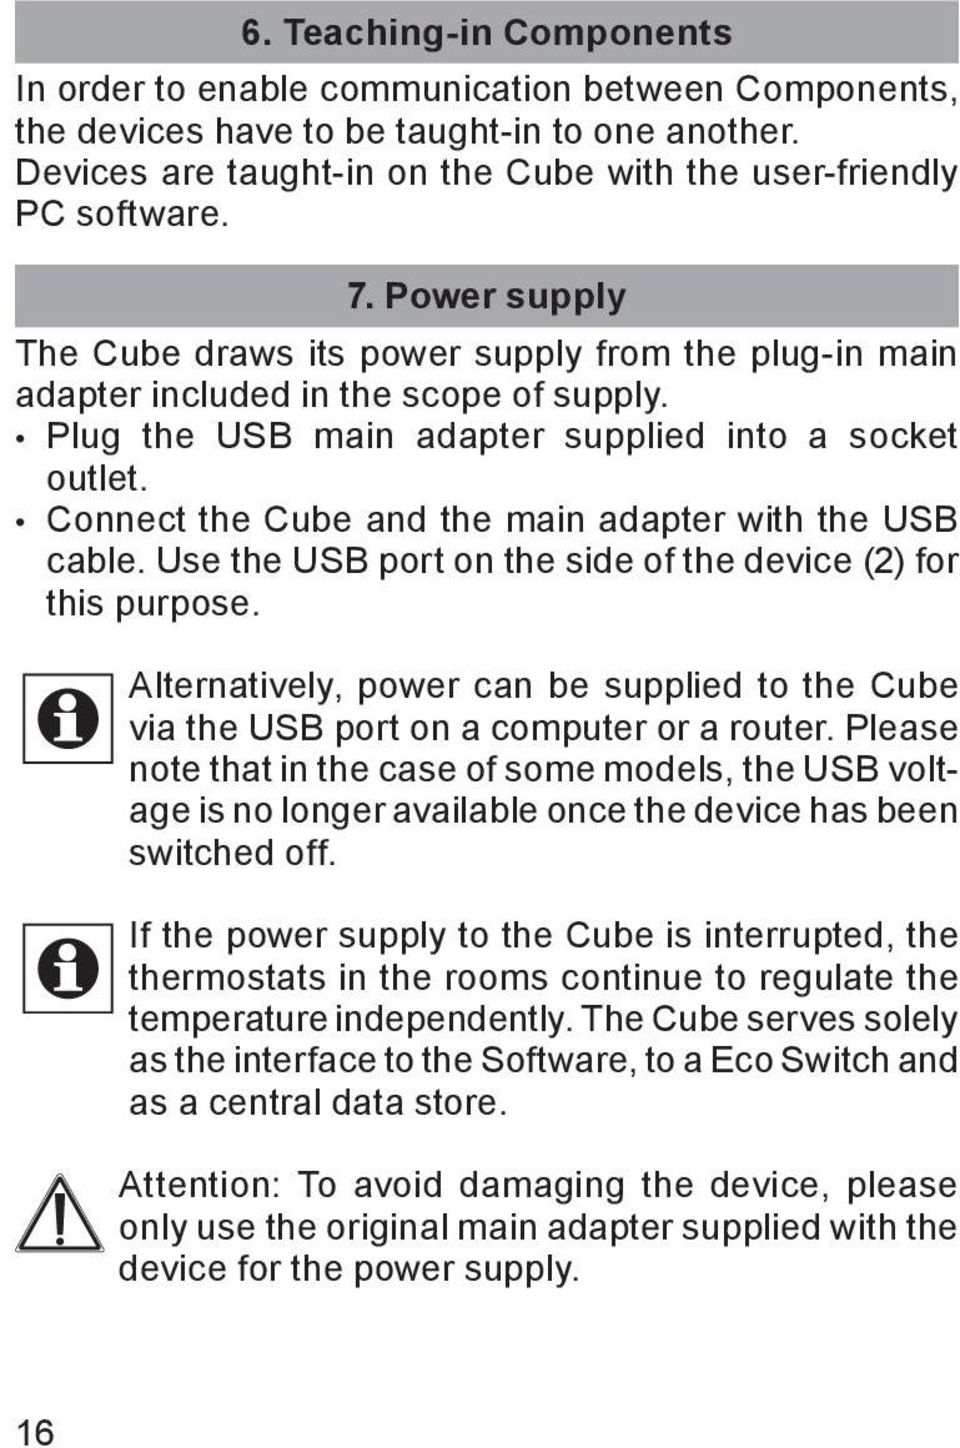 Connect the Cube and the main adapter with the USB cable. Use the USB port on the side of the device (2) for this purpose.